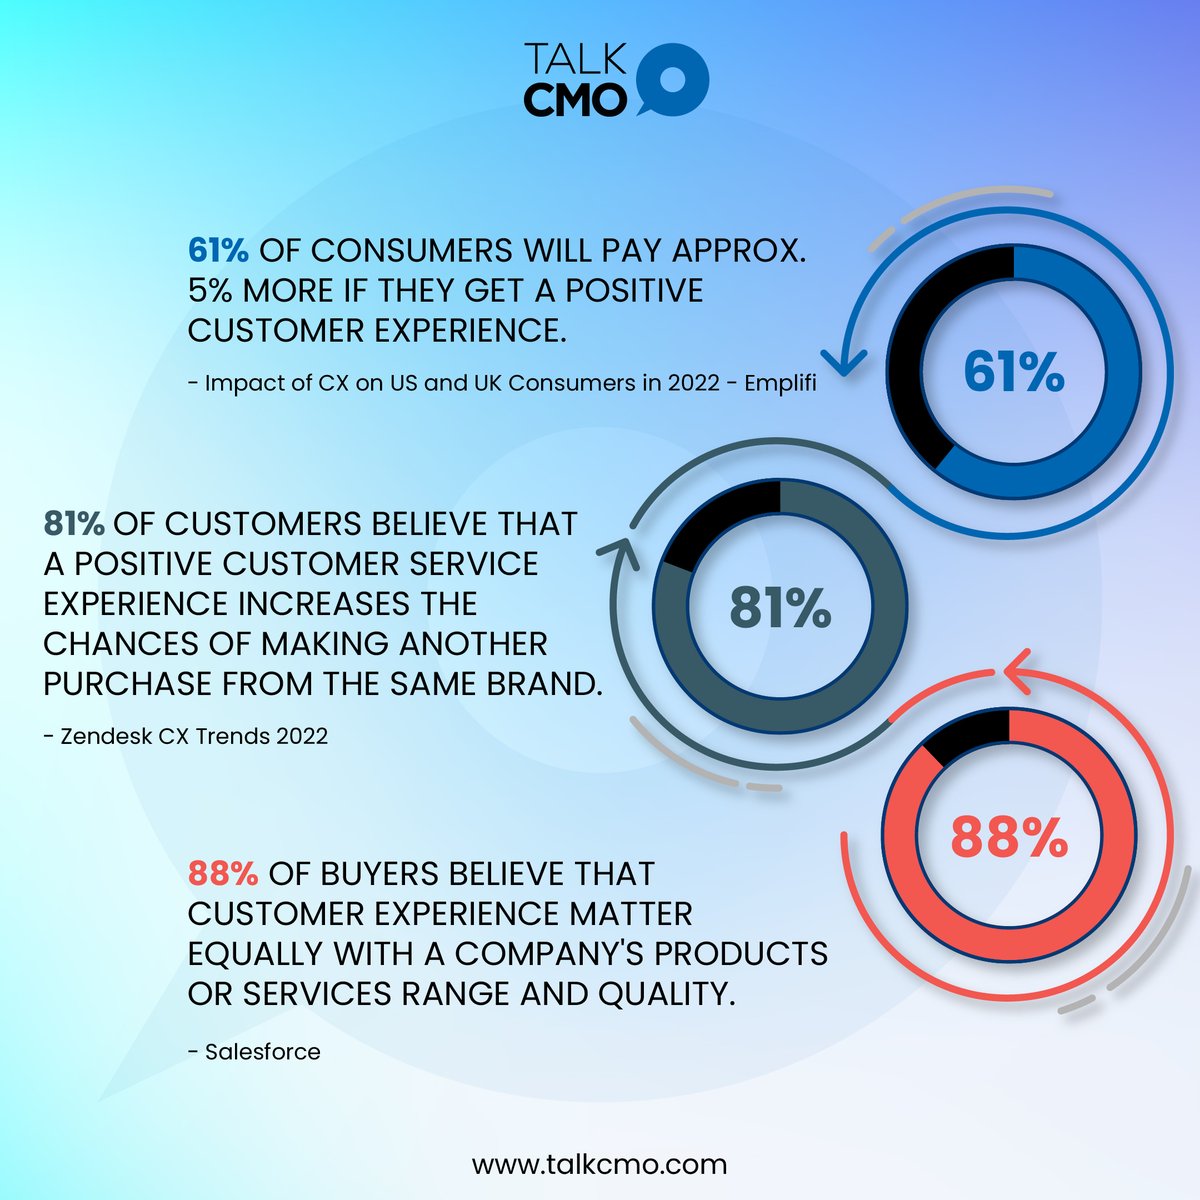 Customers who receive that is personalized for them - product recommendations for example, based on their buying patterns will potentially boost retention rates. Personalized content keeps them engaged and boost loyalty. Learn more: tcmo.in/3SFgCyt #CustomerExperience